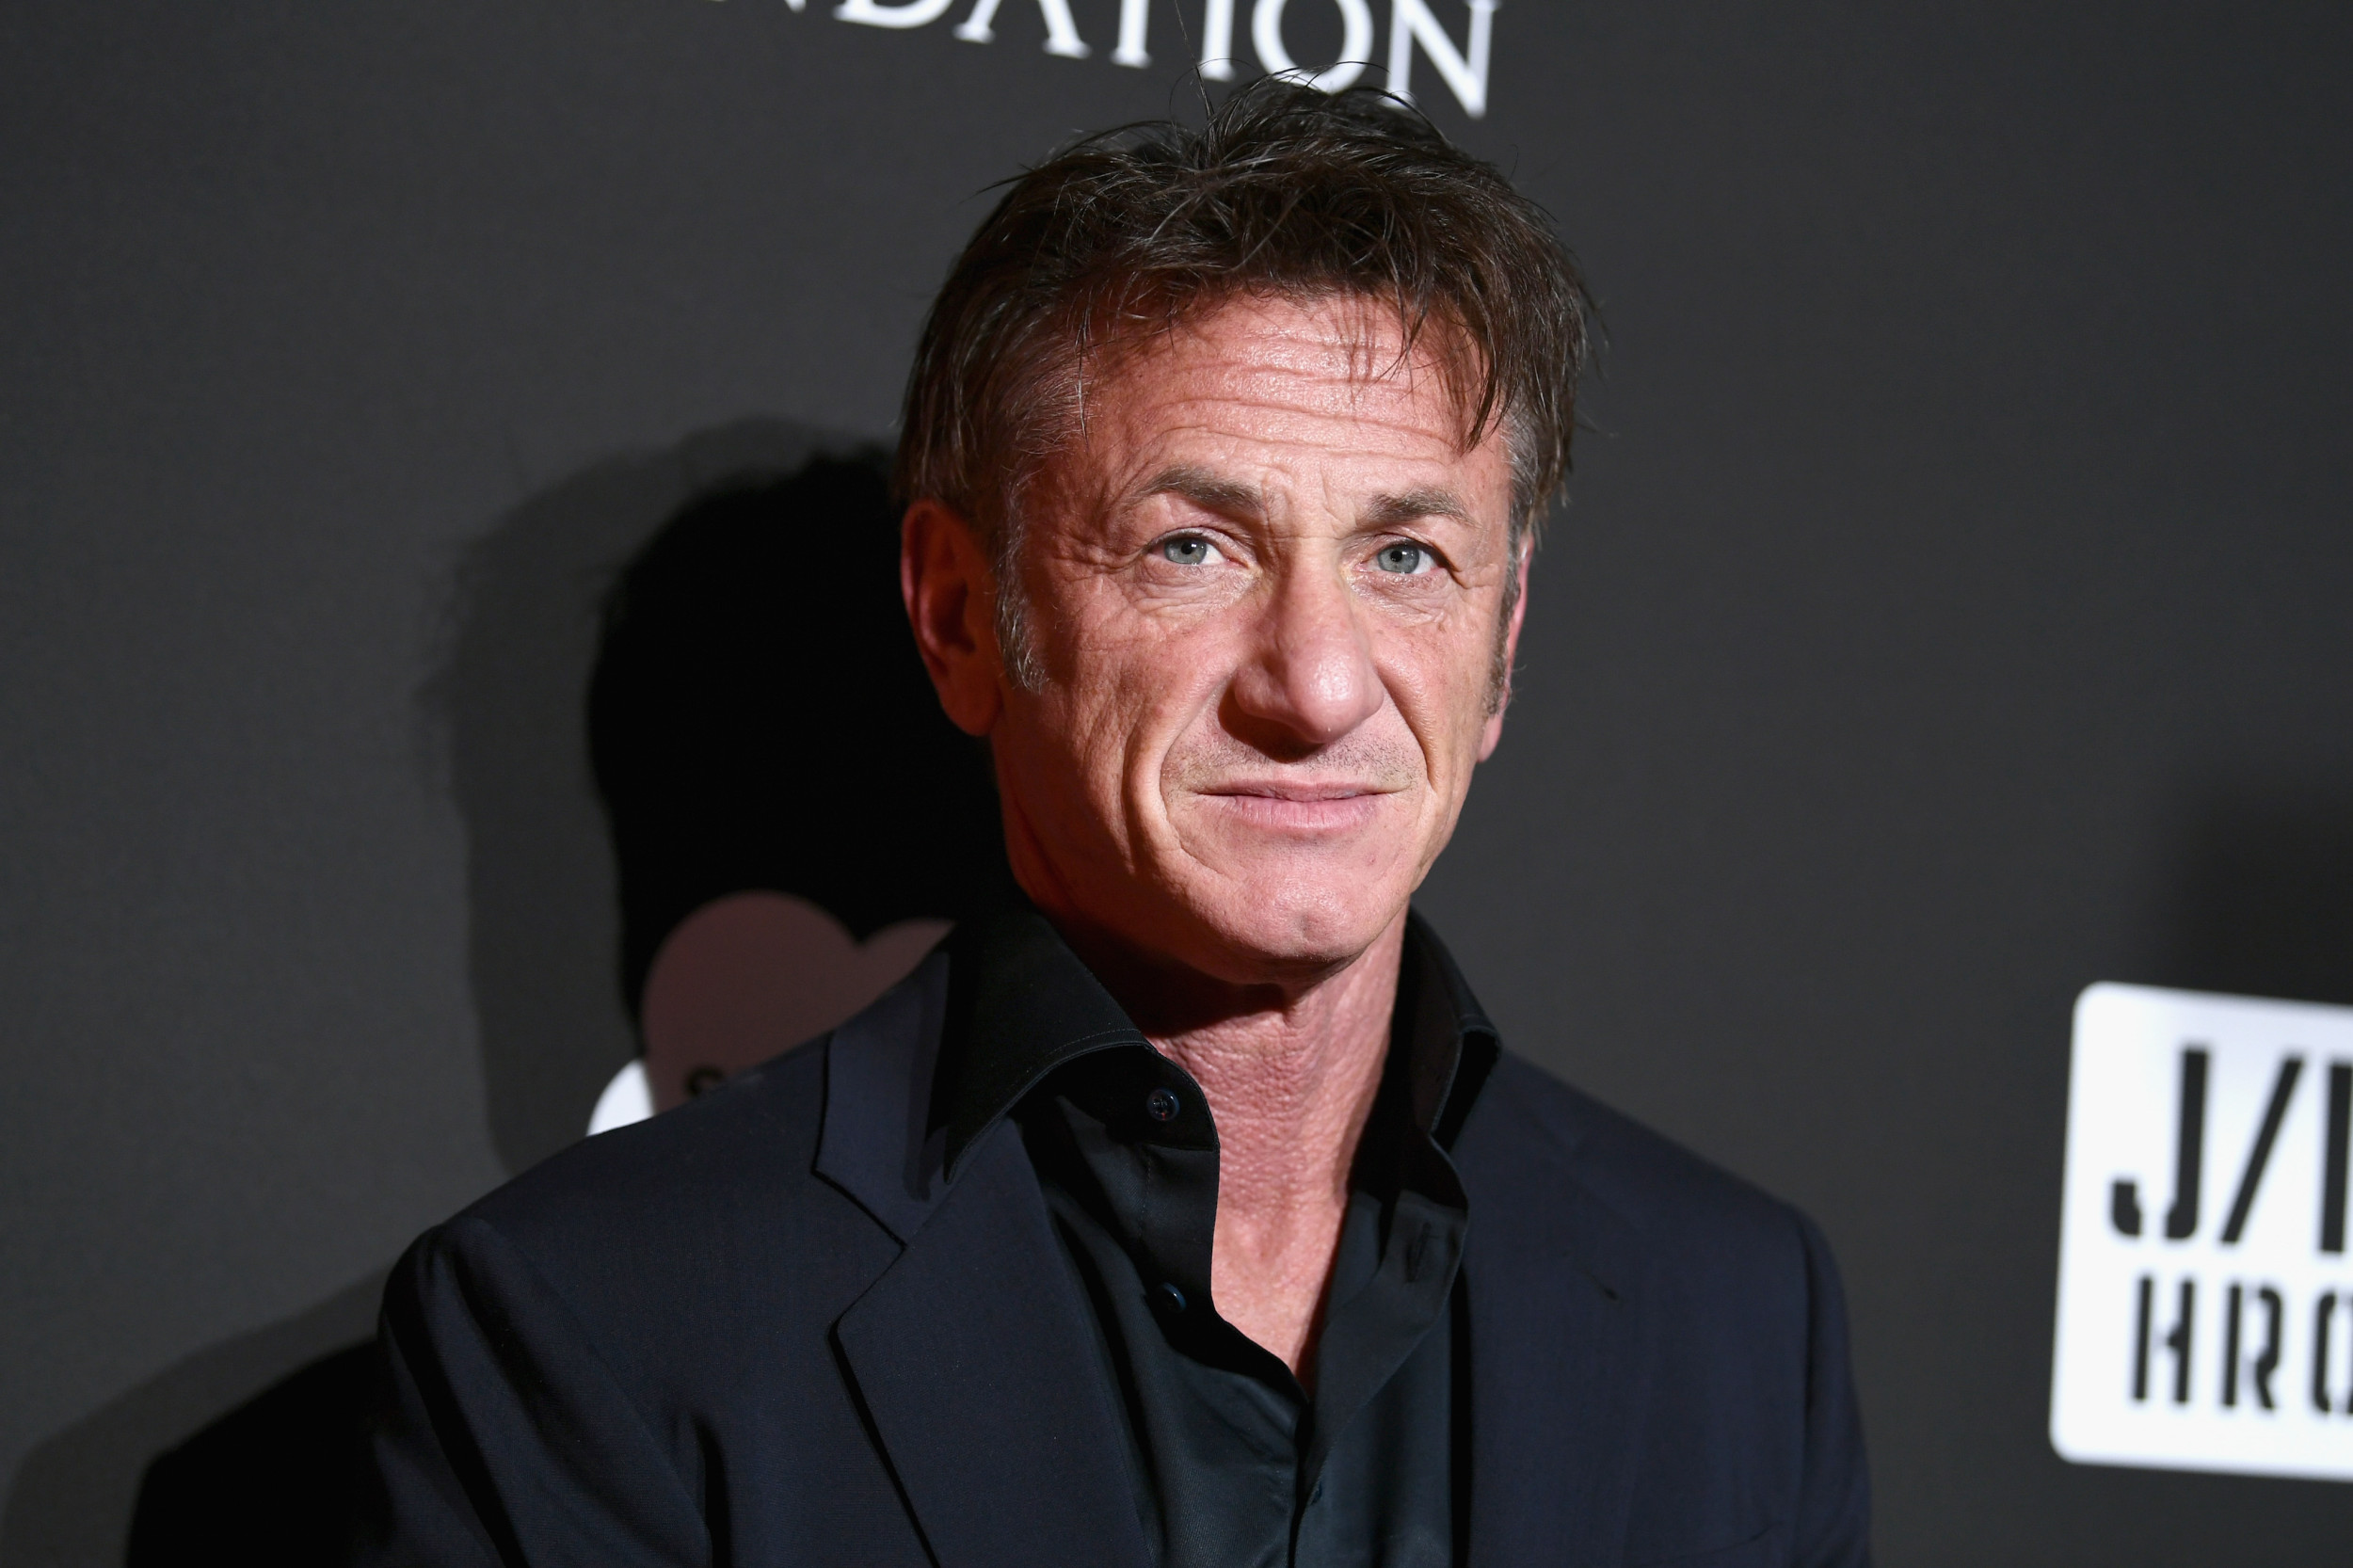 Sean Penn’s Remarks on Creating Digital Daughters Spark Outrage, Confusion